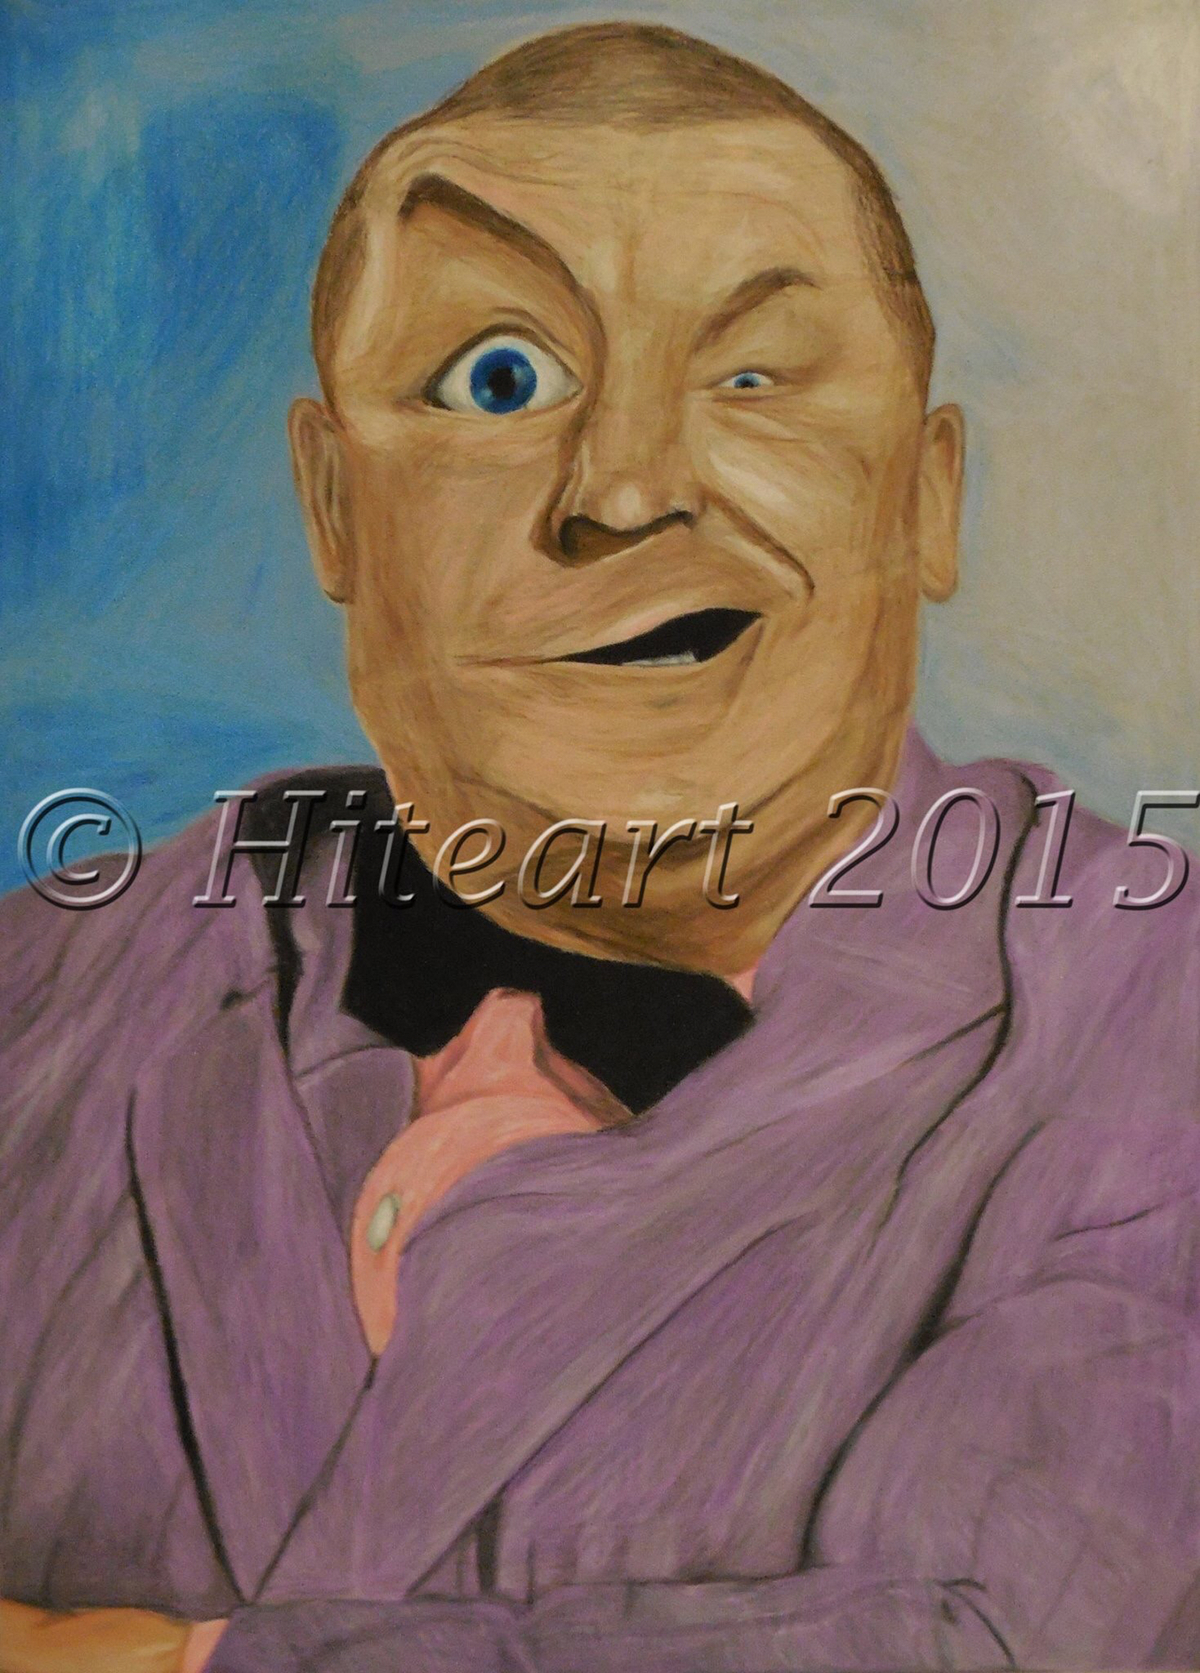 Illustrator curly curly howard 3 stooges Three Stooges tattoo pencil prismacolor